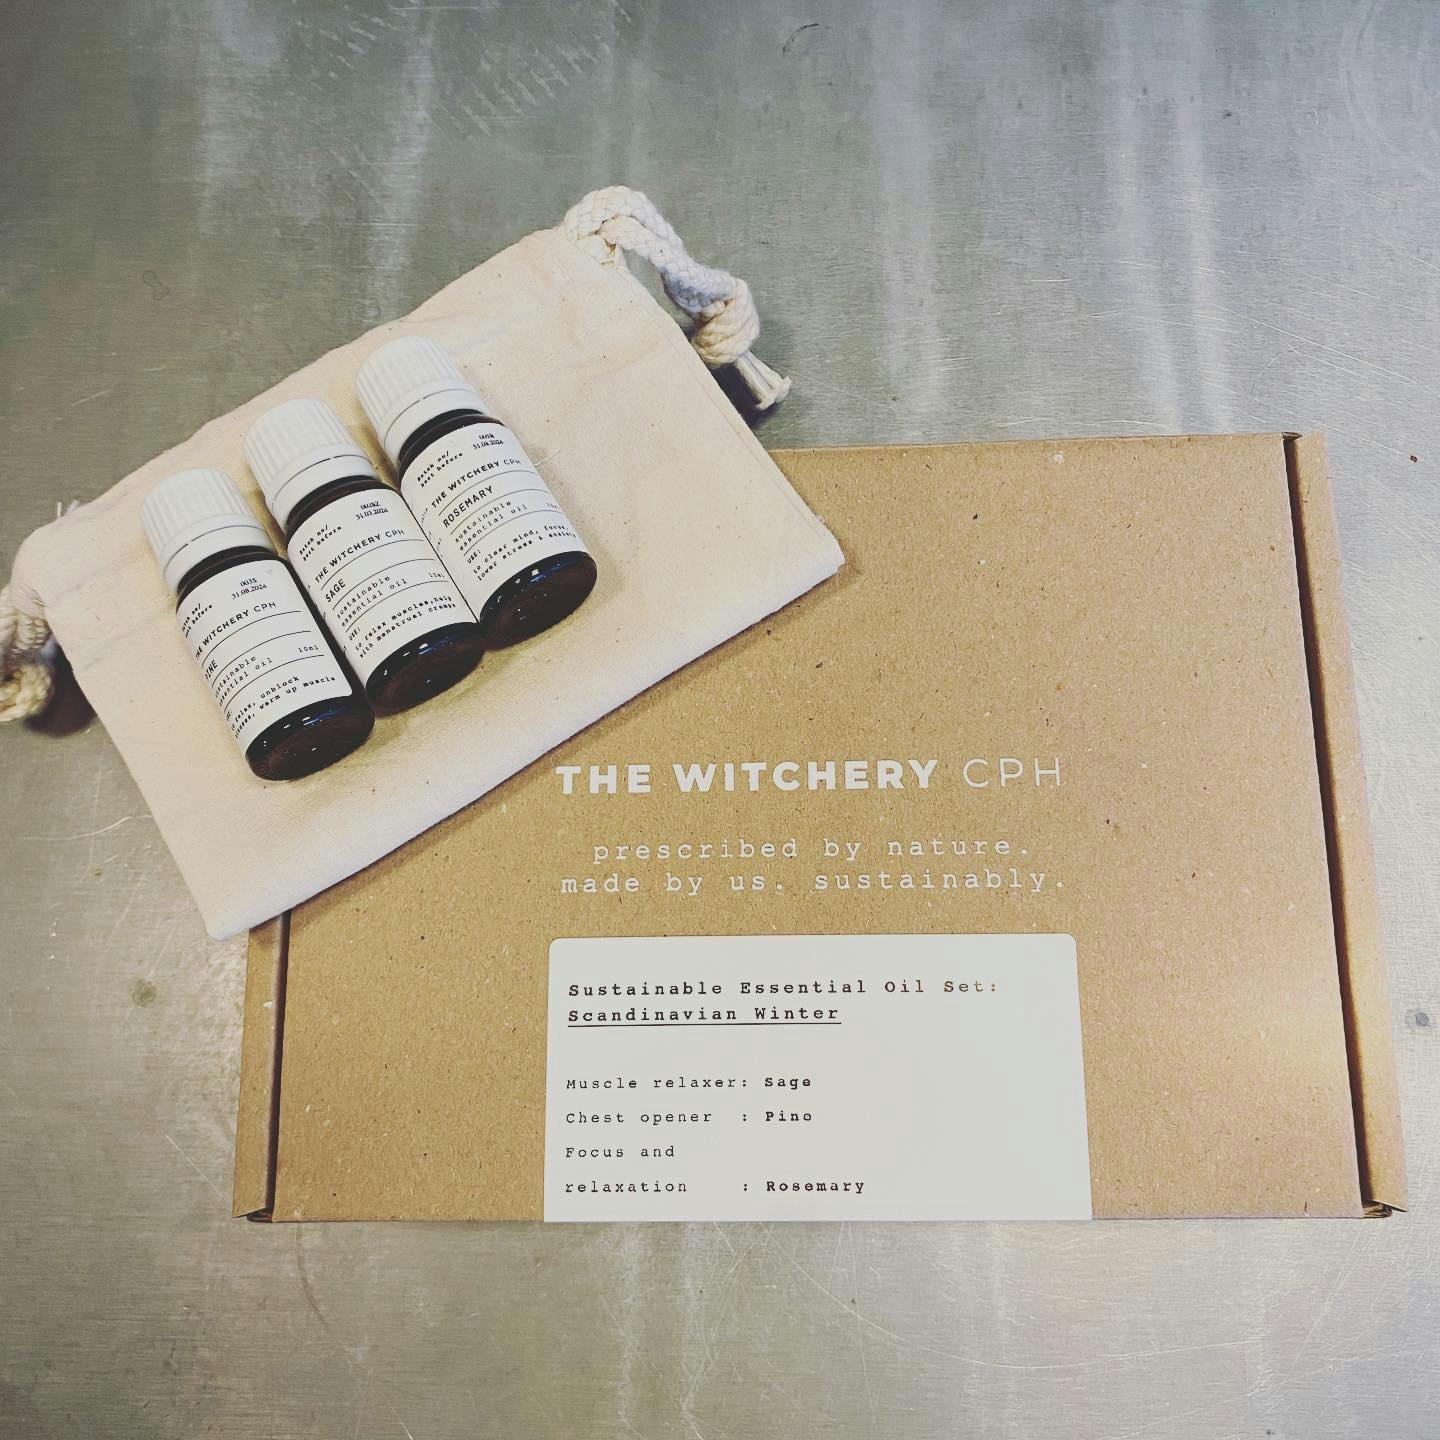 Gift set, essential oils gift, pine oil, sage oil, rosemary oil, Scandinavian Winter, The Witchery CPH, Nordic beauty